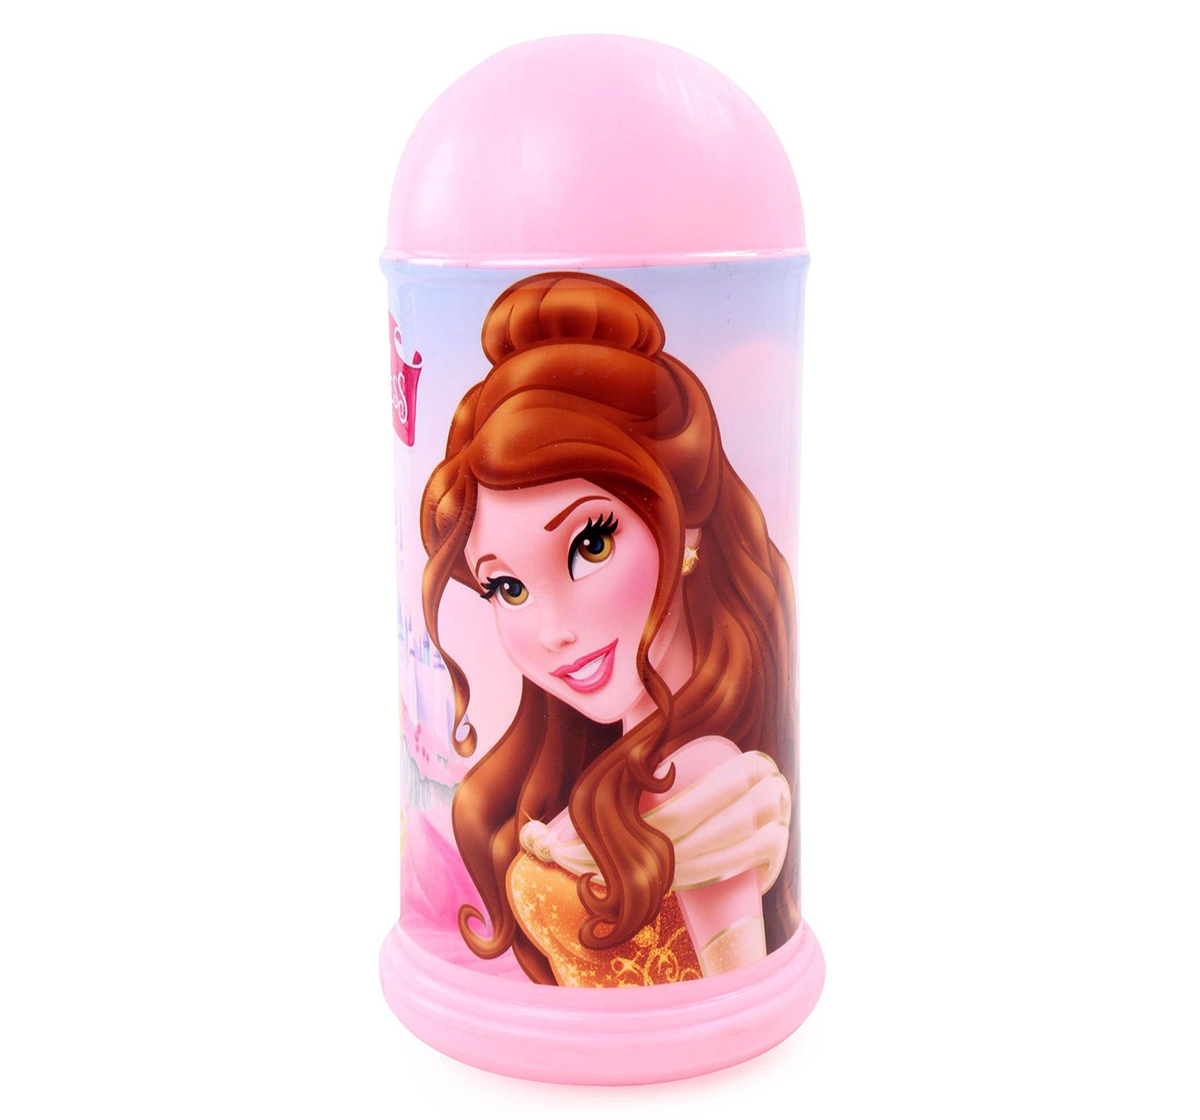 Itoys | IToys Disney Princess Coin Bank Novelty for Kids Age 4Y+